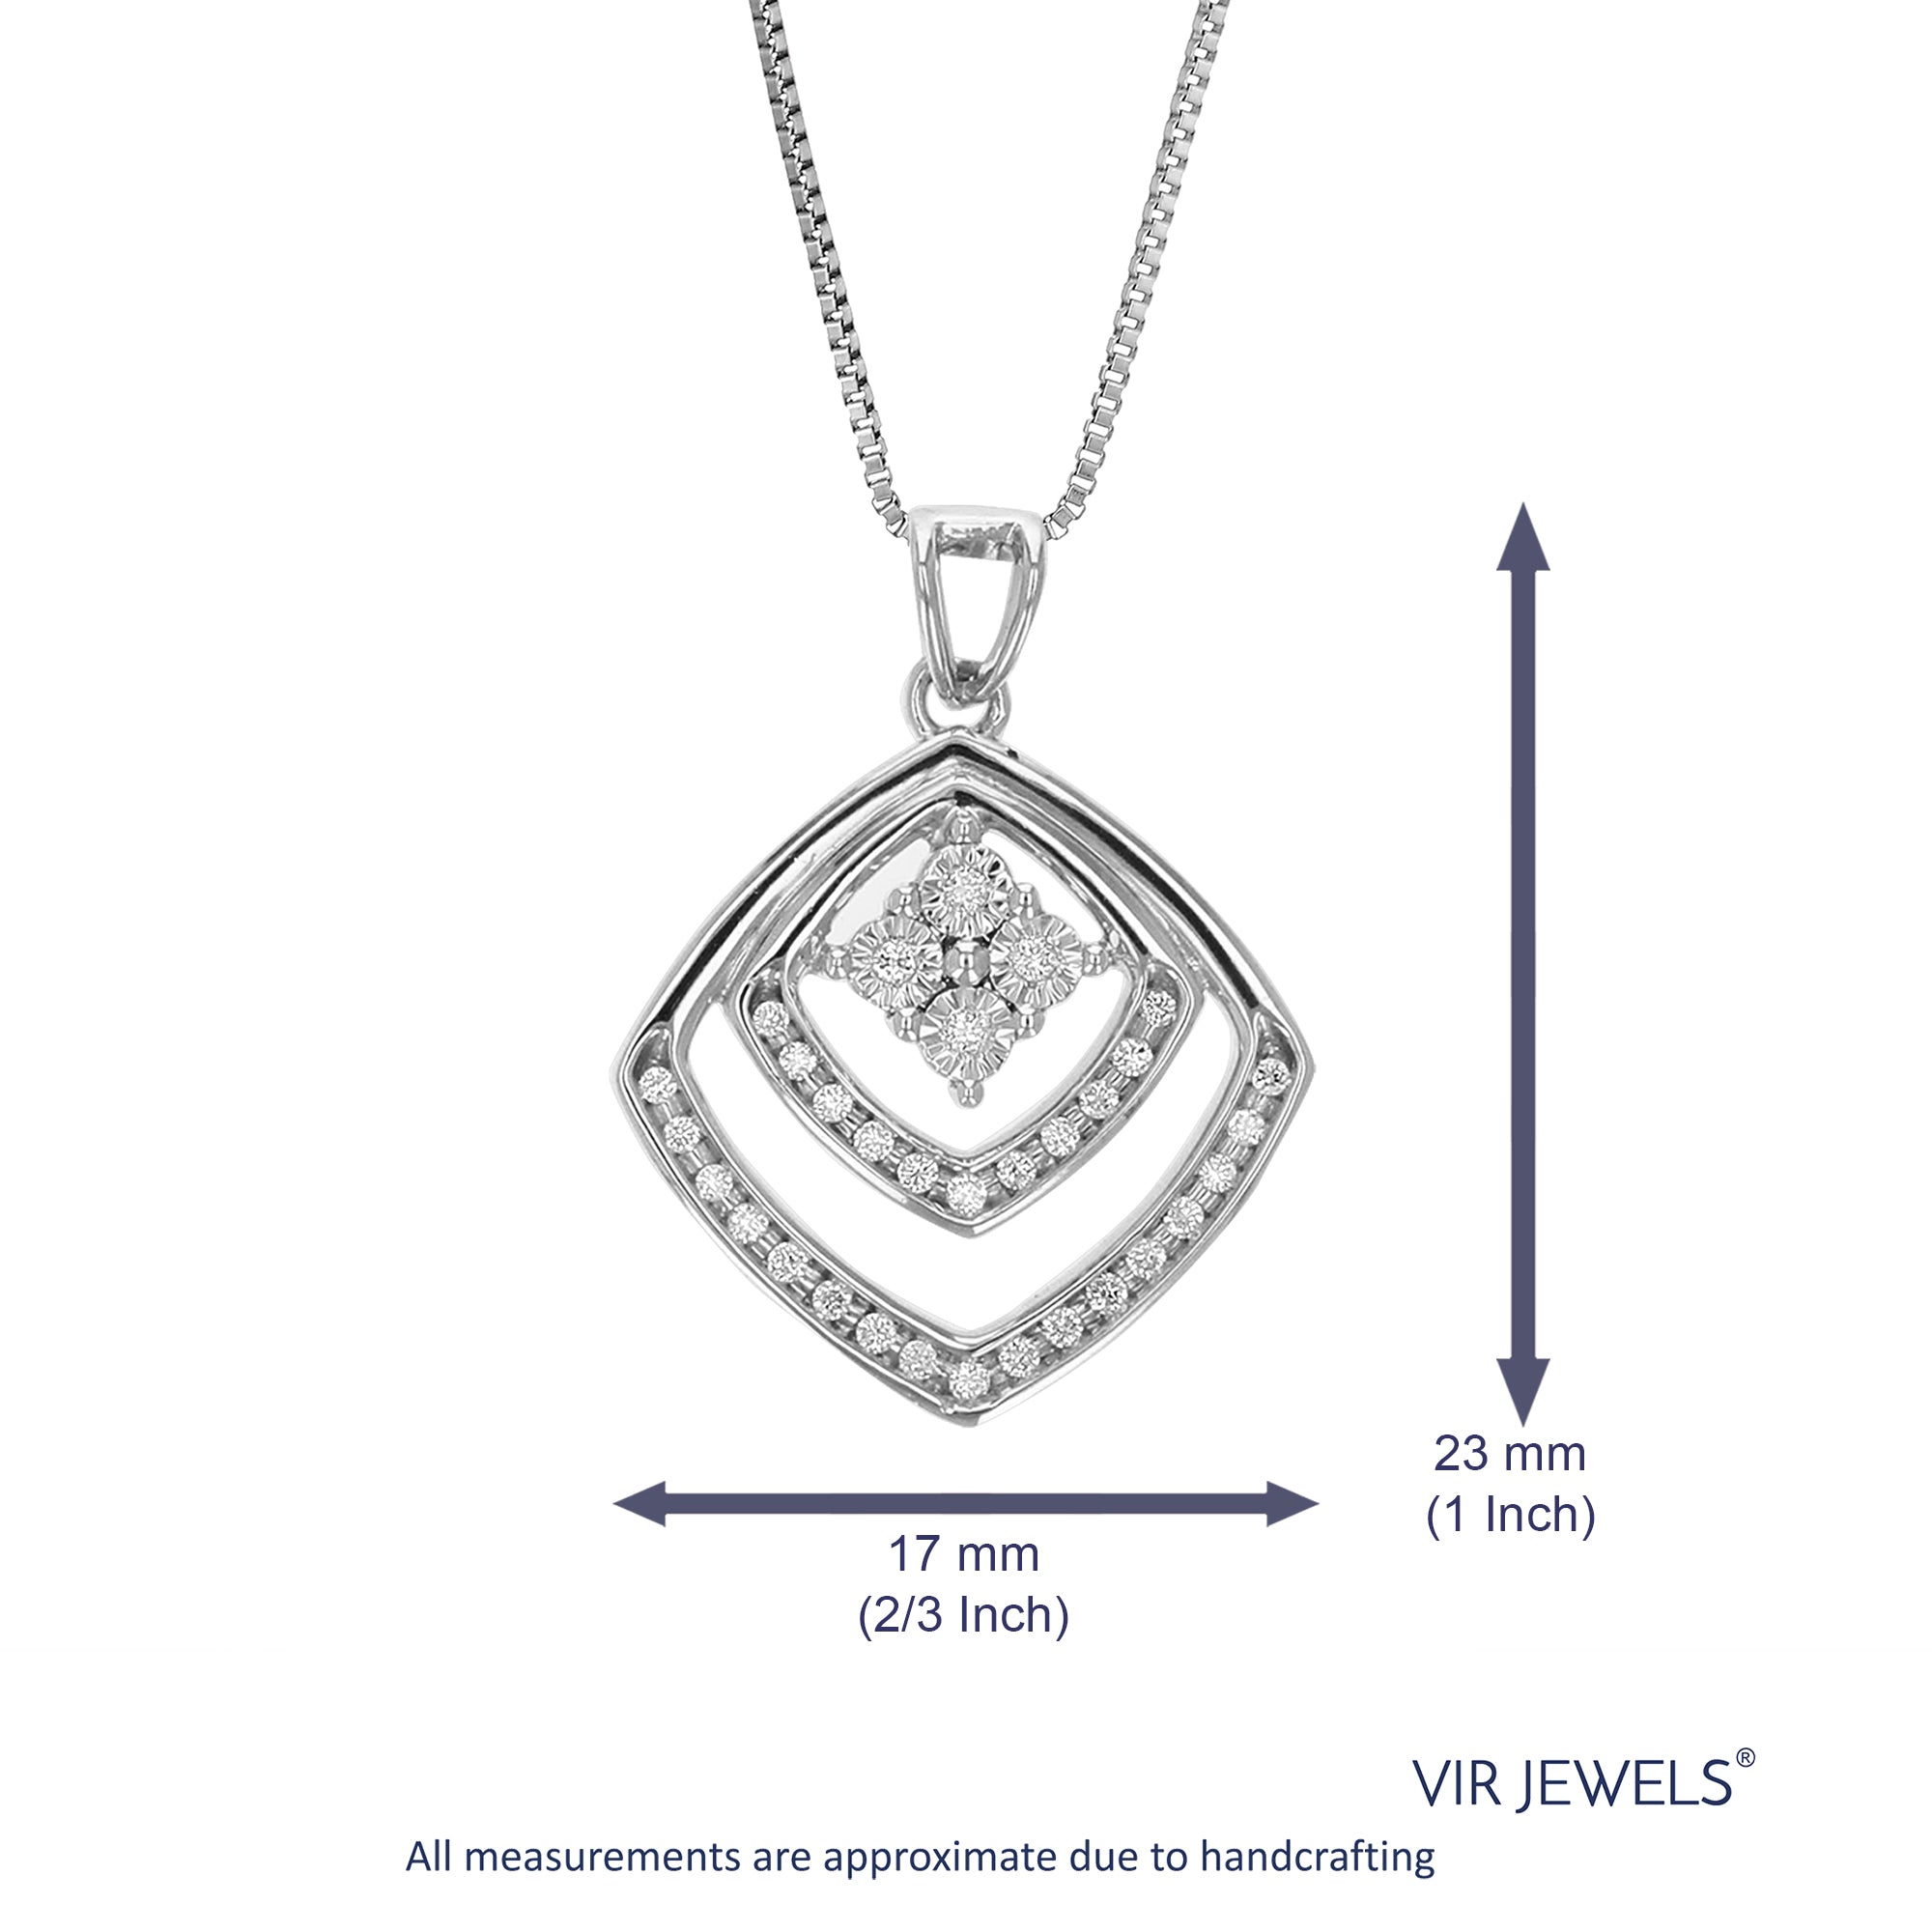 1/8 cttw Diamond Pendant Necklace for Women, Lab Grown Diamond Double Square Pendant Necklace in .925 Sterling Silver with Chain, Size 3/4 Inch